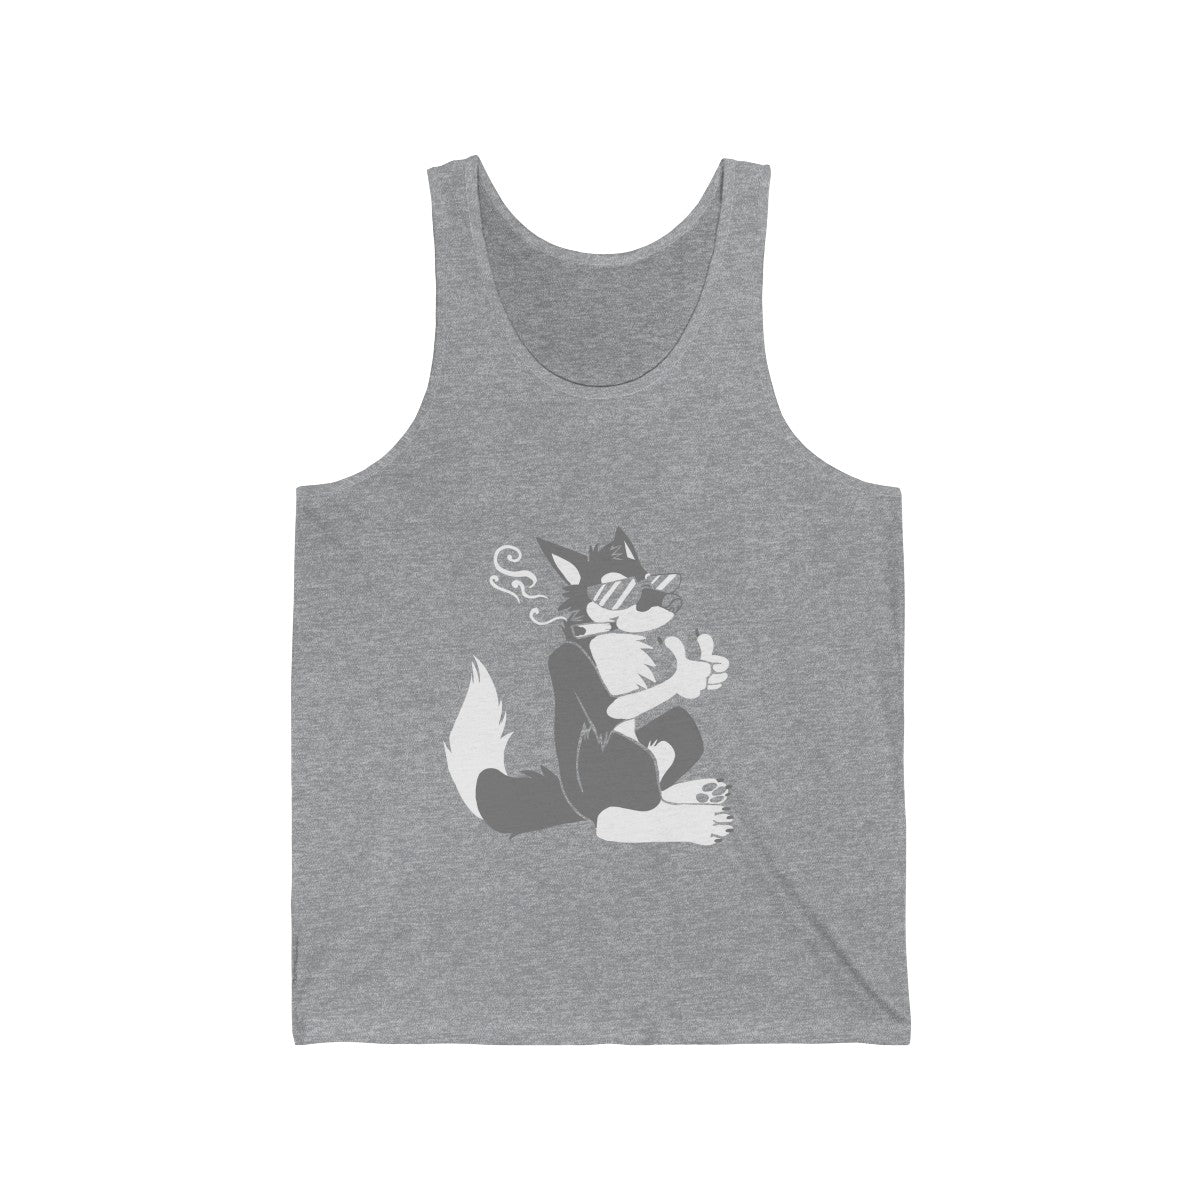 Chill Out - Tank Top Tank Top Dire Creatures Heather XS 